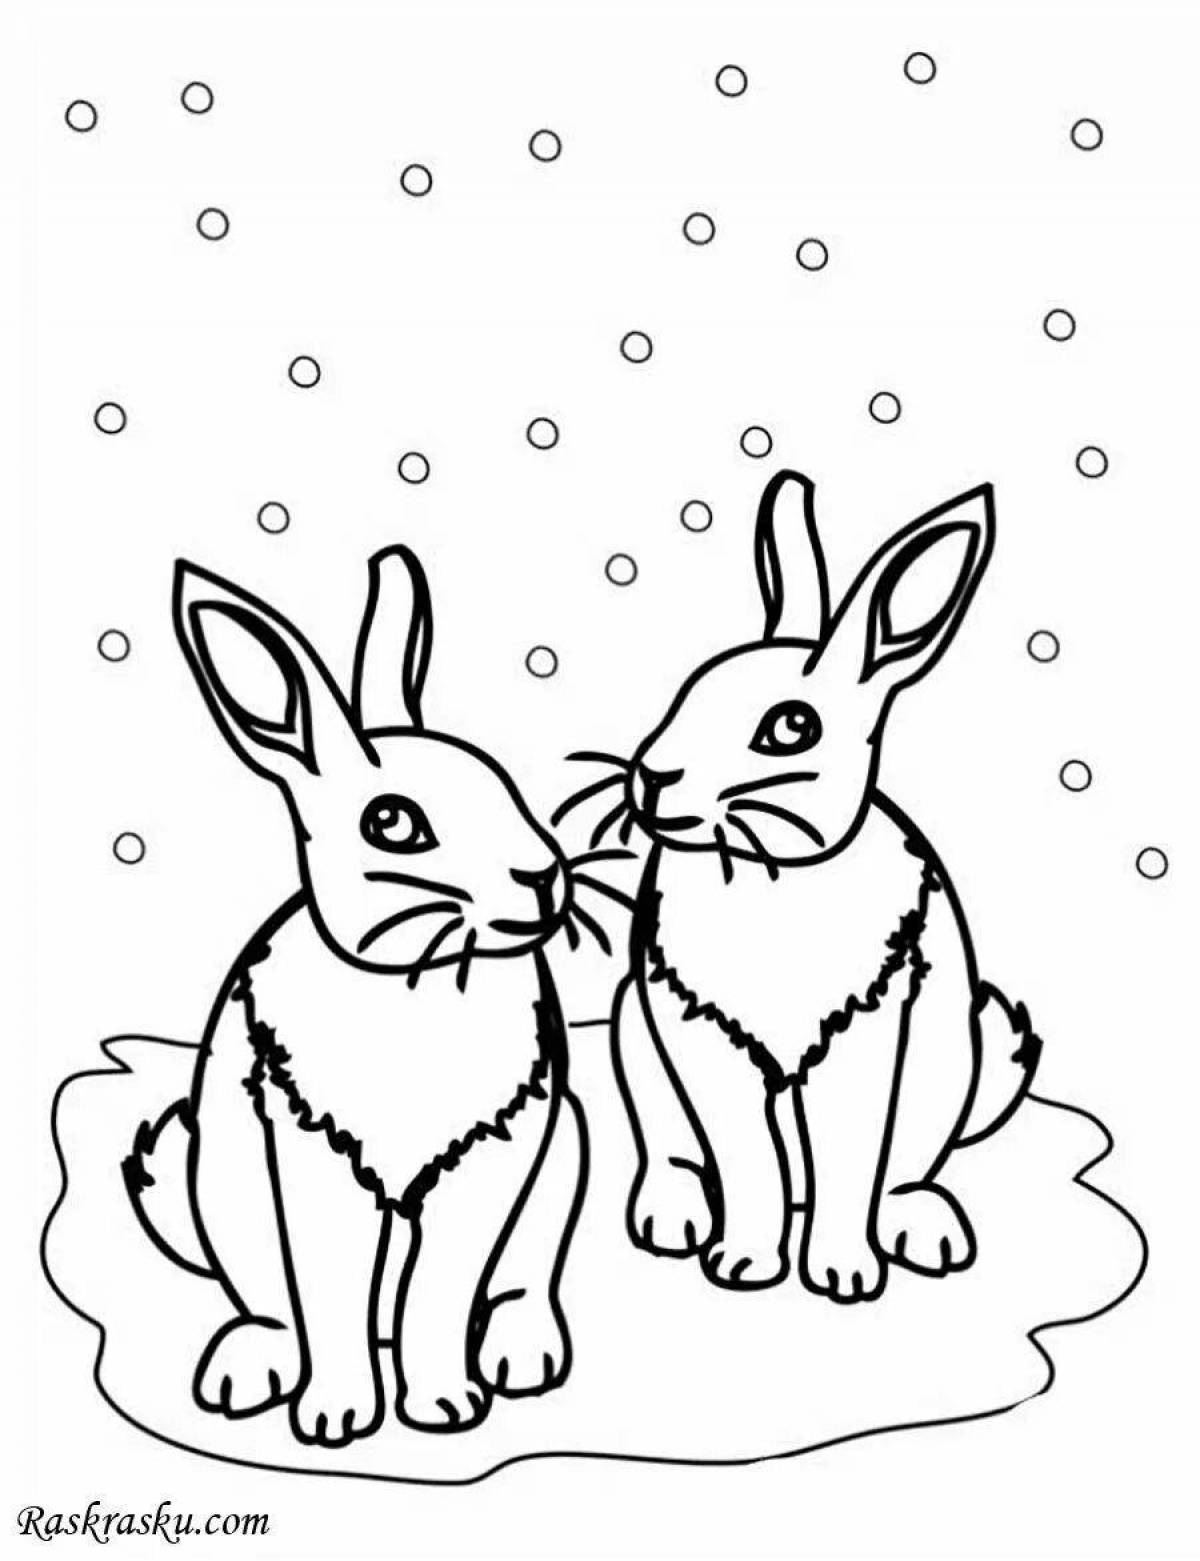 Dazzling winter animals coloring book for 3-4 year olds